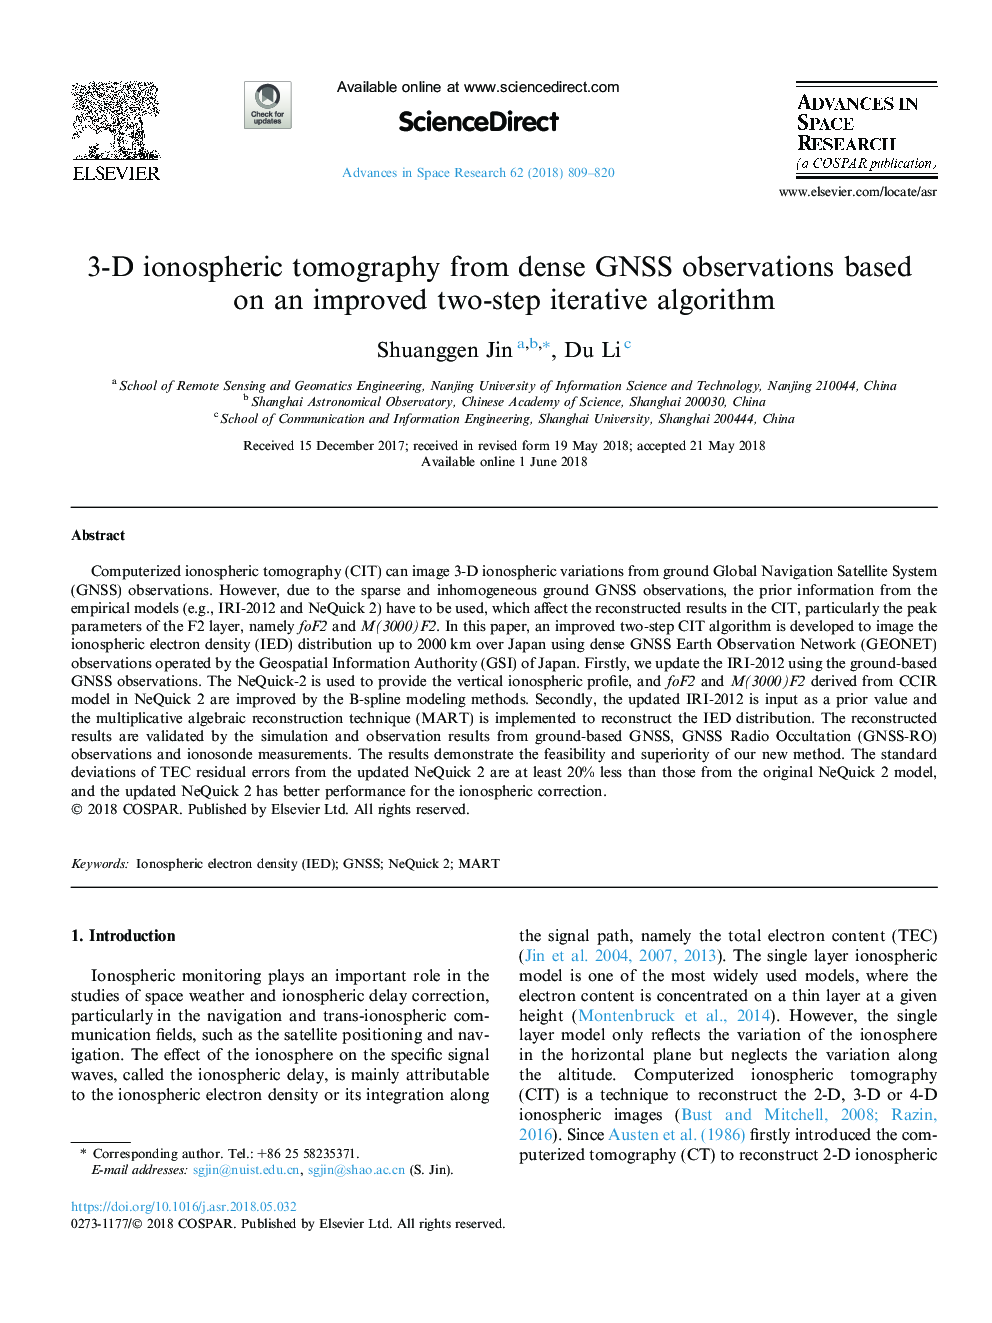 3-D ionospheric tomography from dense GNSS observations based on an improved two-step iterative algorithm